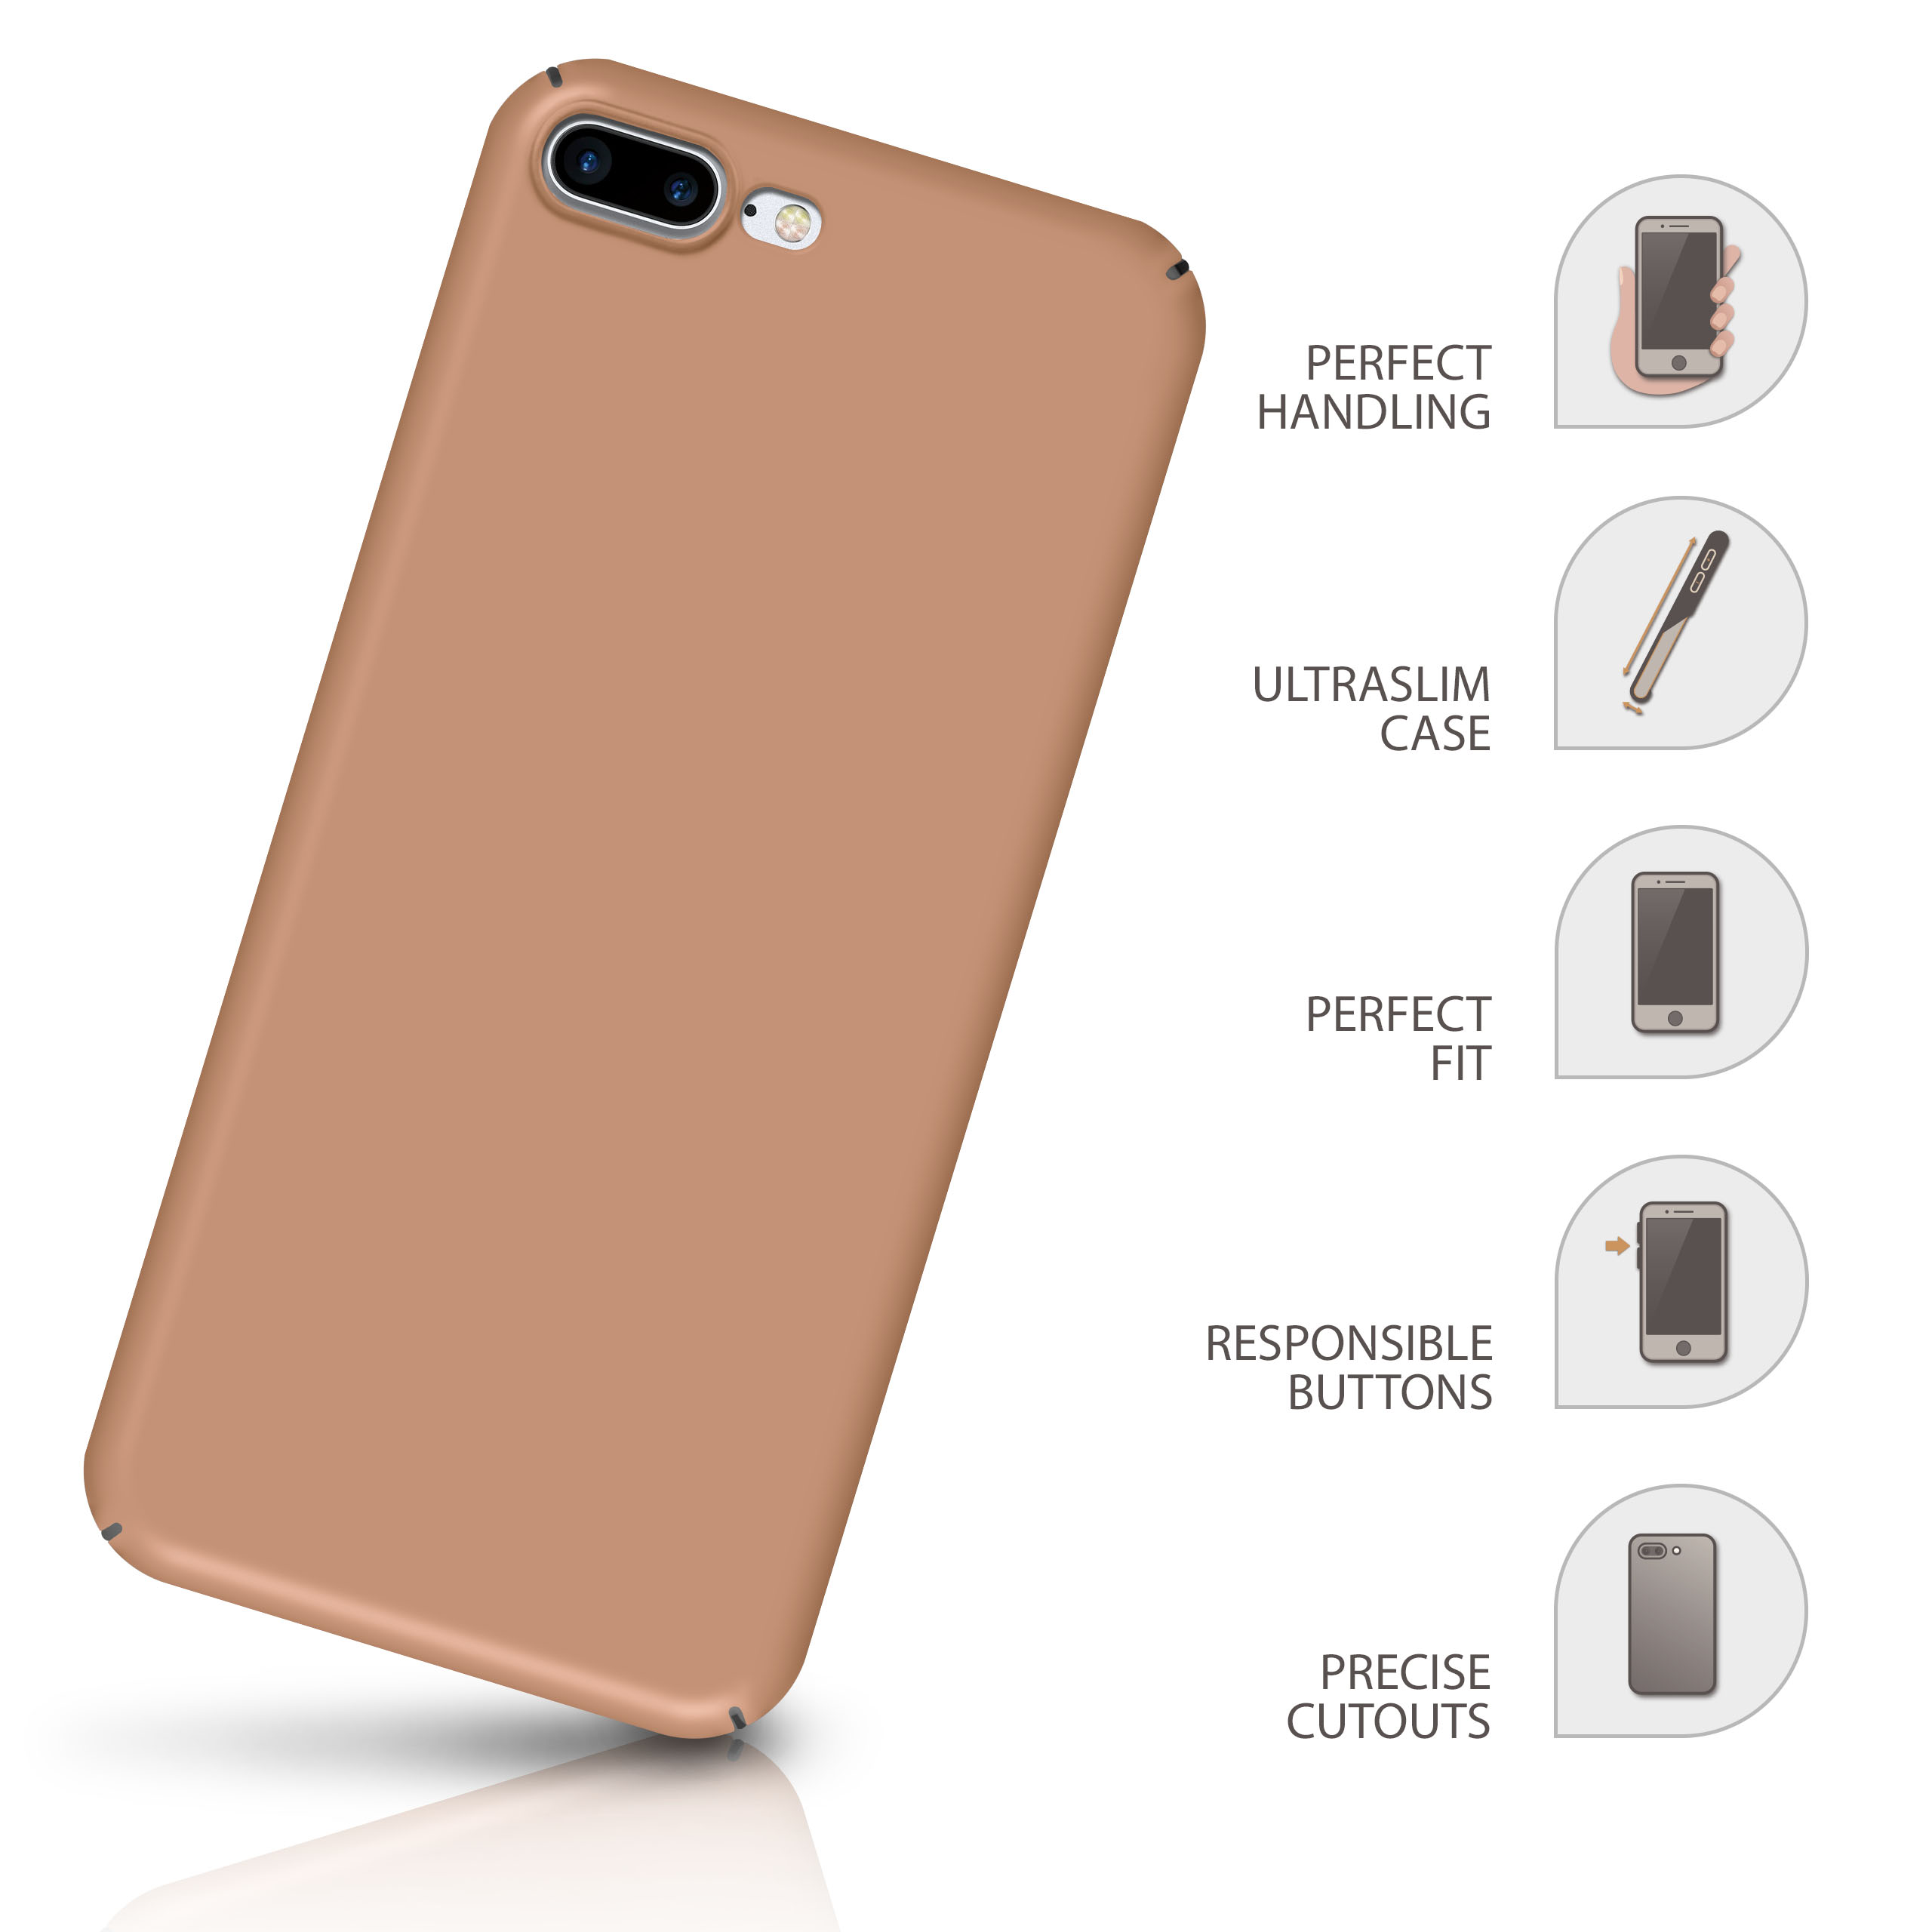 MOEX Alpha Plus Backcover, Case, iPhone 7 Gold Plus, / Apple, iPhone 8